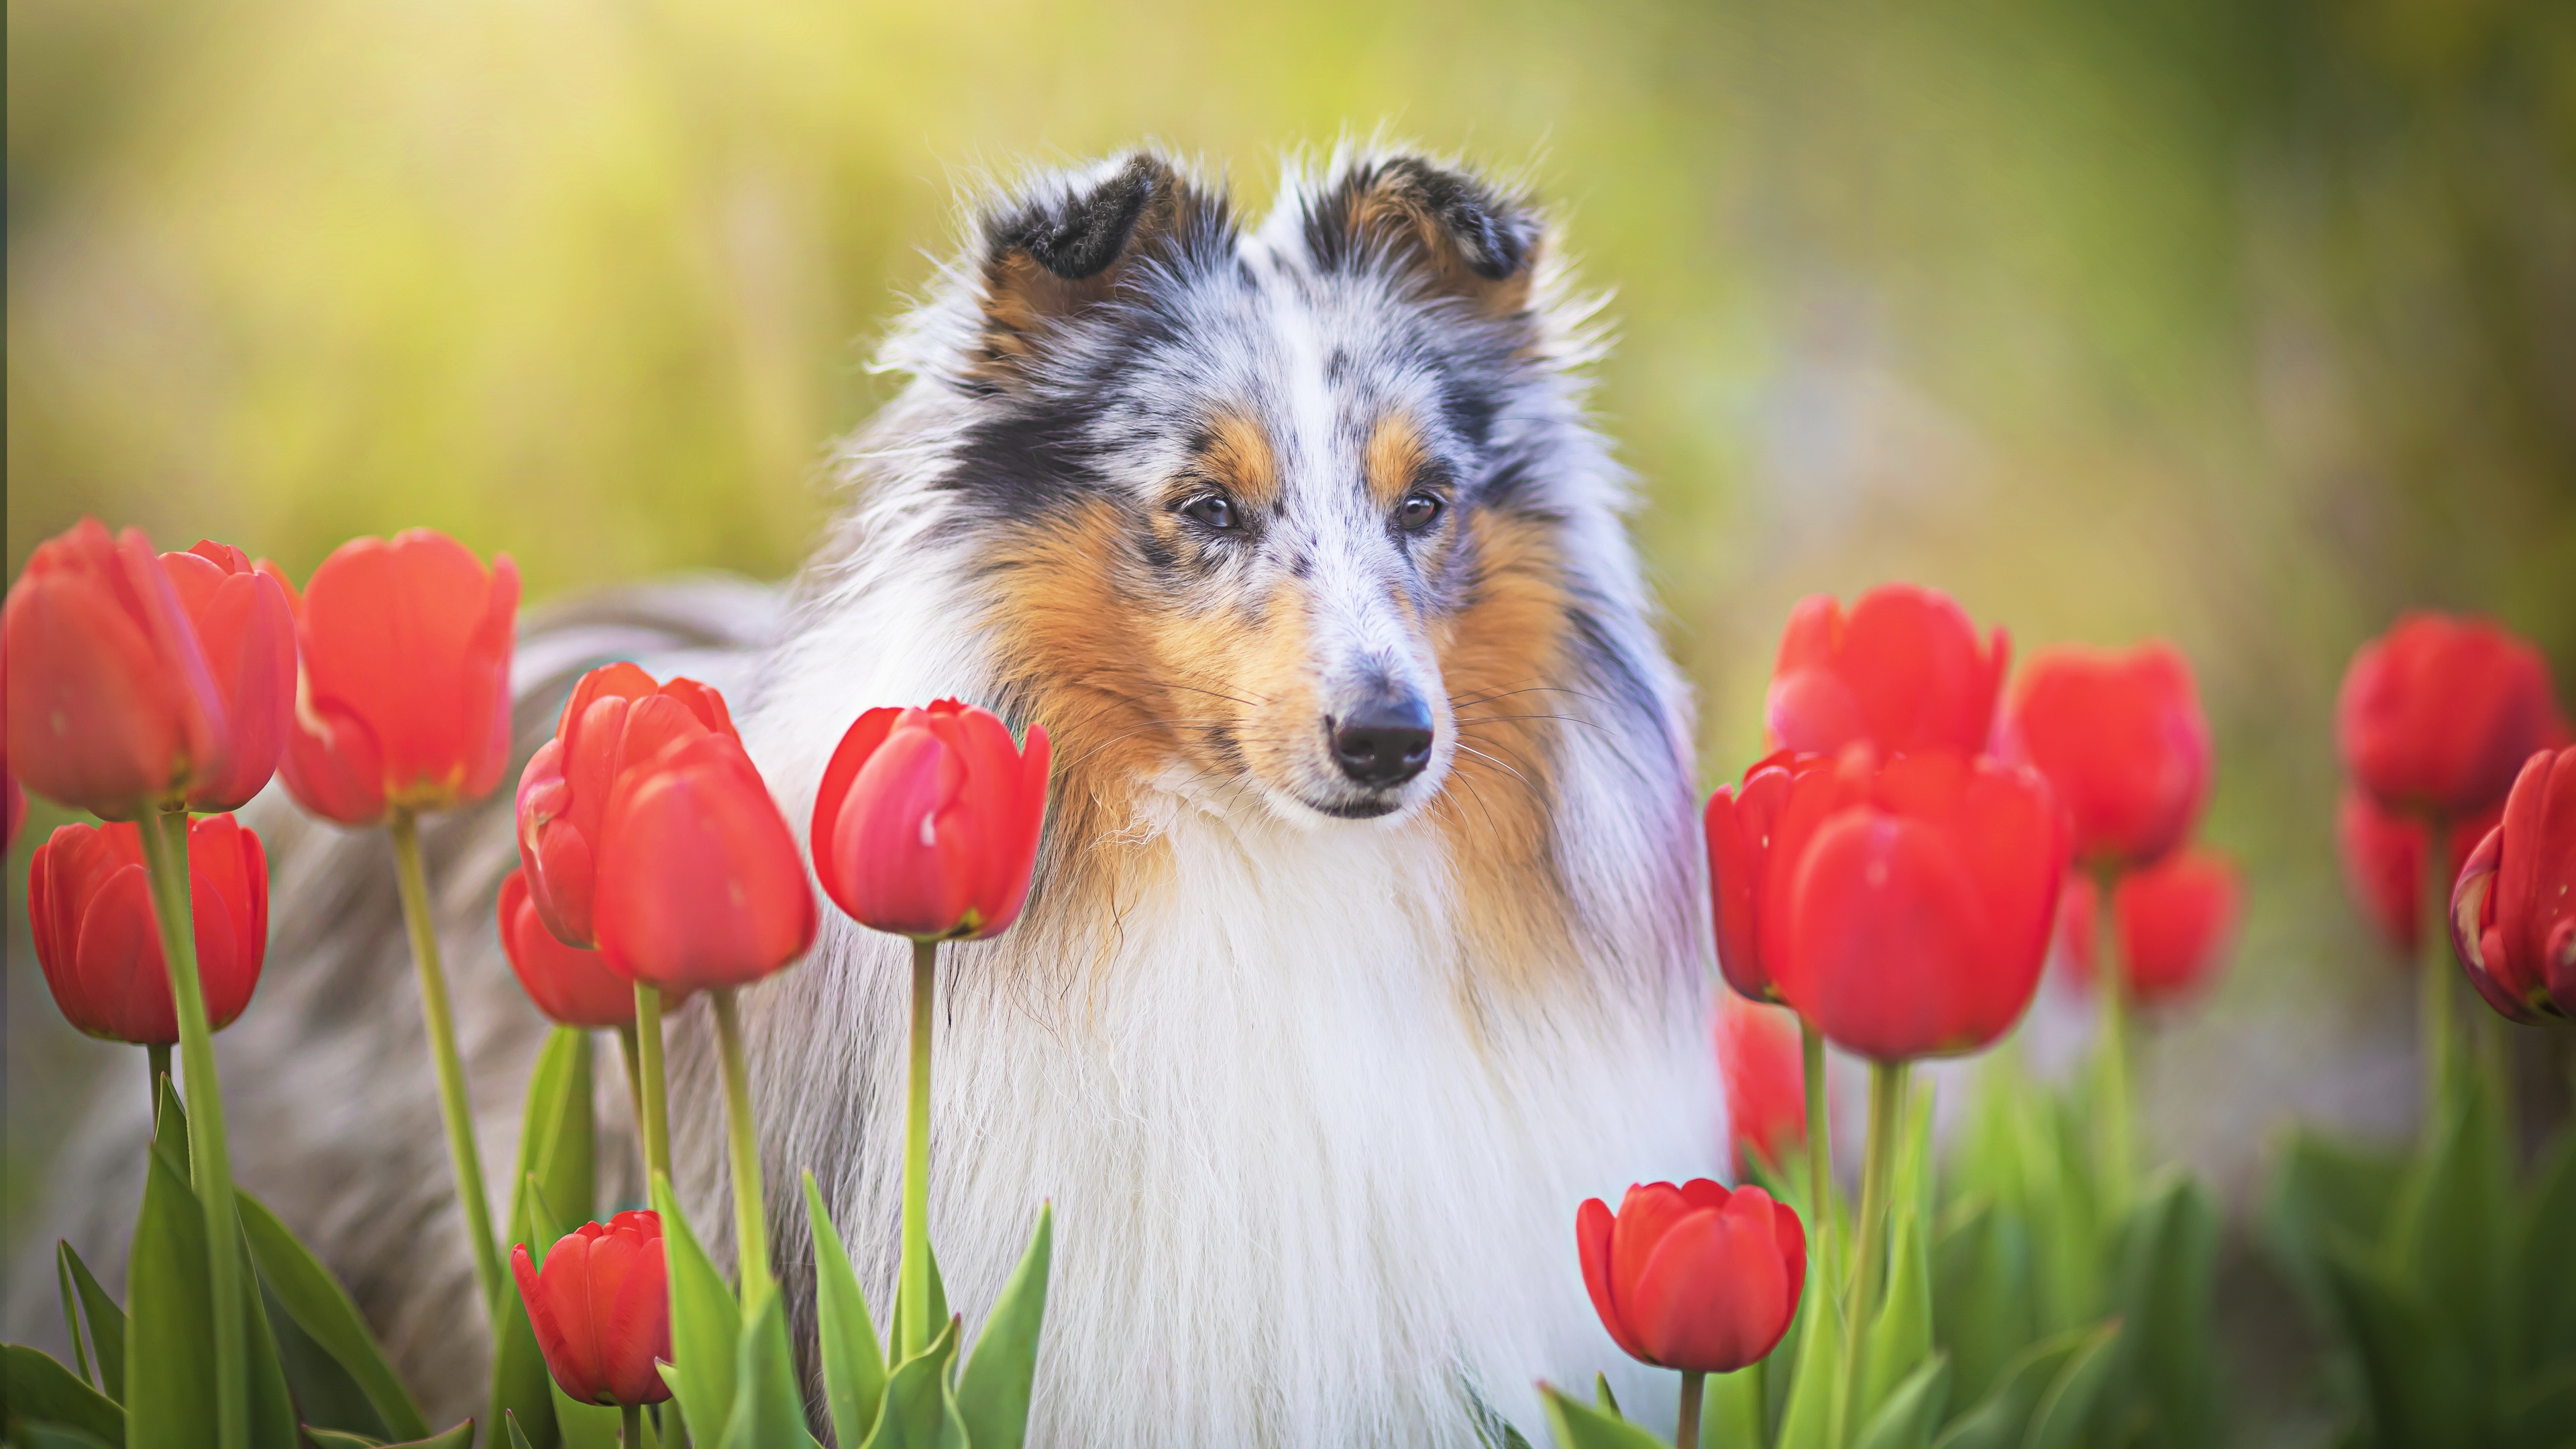 Dog Outdoors Animals Flowers Plants Tulips Red Flowers Mammals 3840x2160